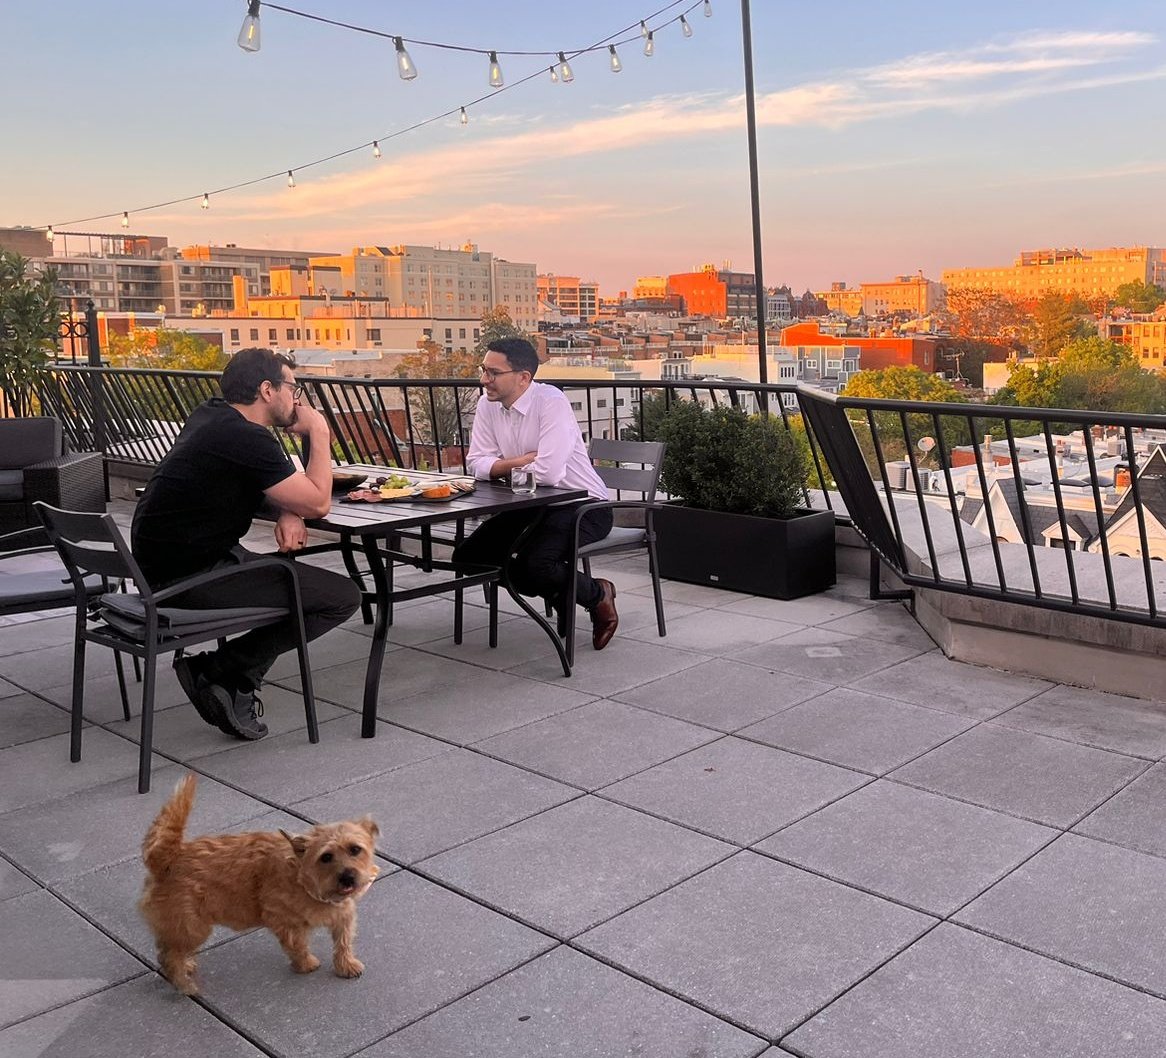 The actual spring meeting I came for. To more great conversations with @andyvalencianoy and @AAbdenur (photo by her courtesy) and Akela the most curious terrier about productive transformation.